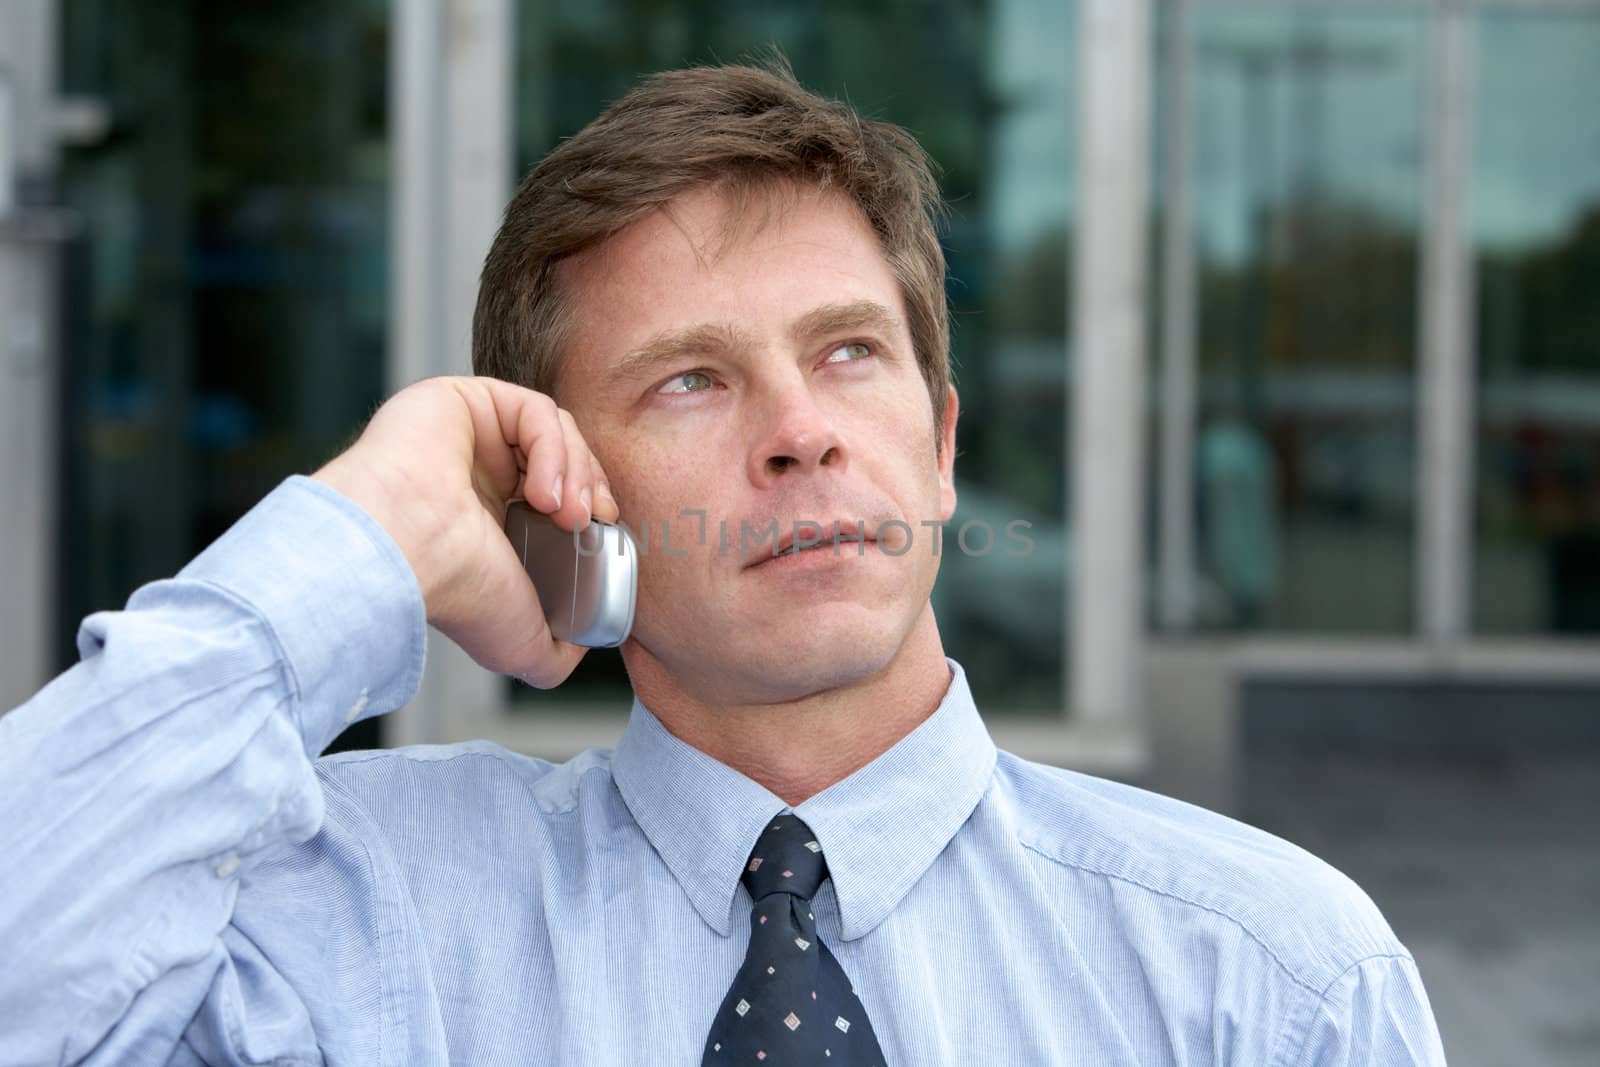 Man using cell phone outdoors, looking up